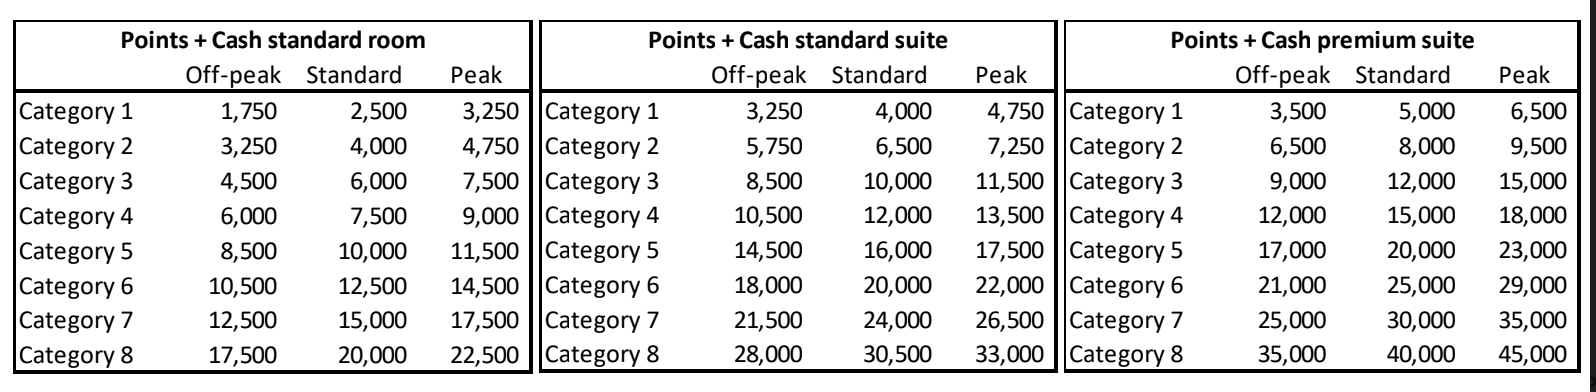 Hyatt award chart is also adding peak and off-peak rates to the Points + Cash redemption levels.